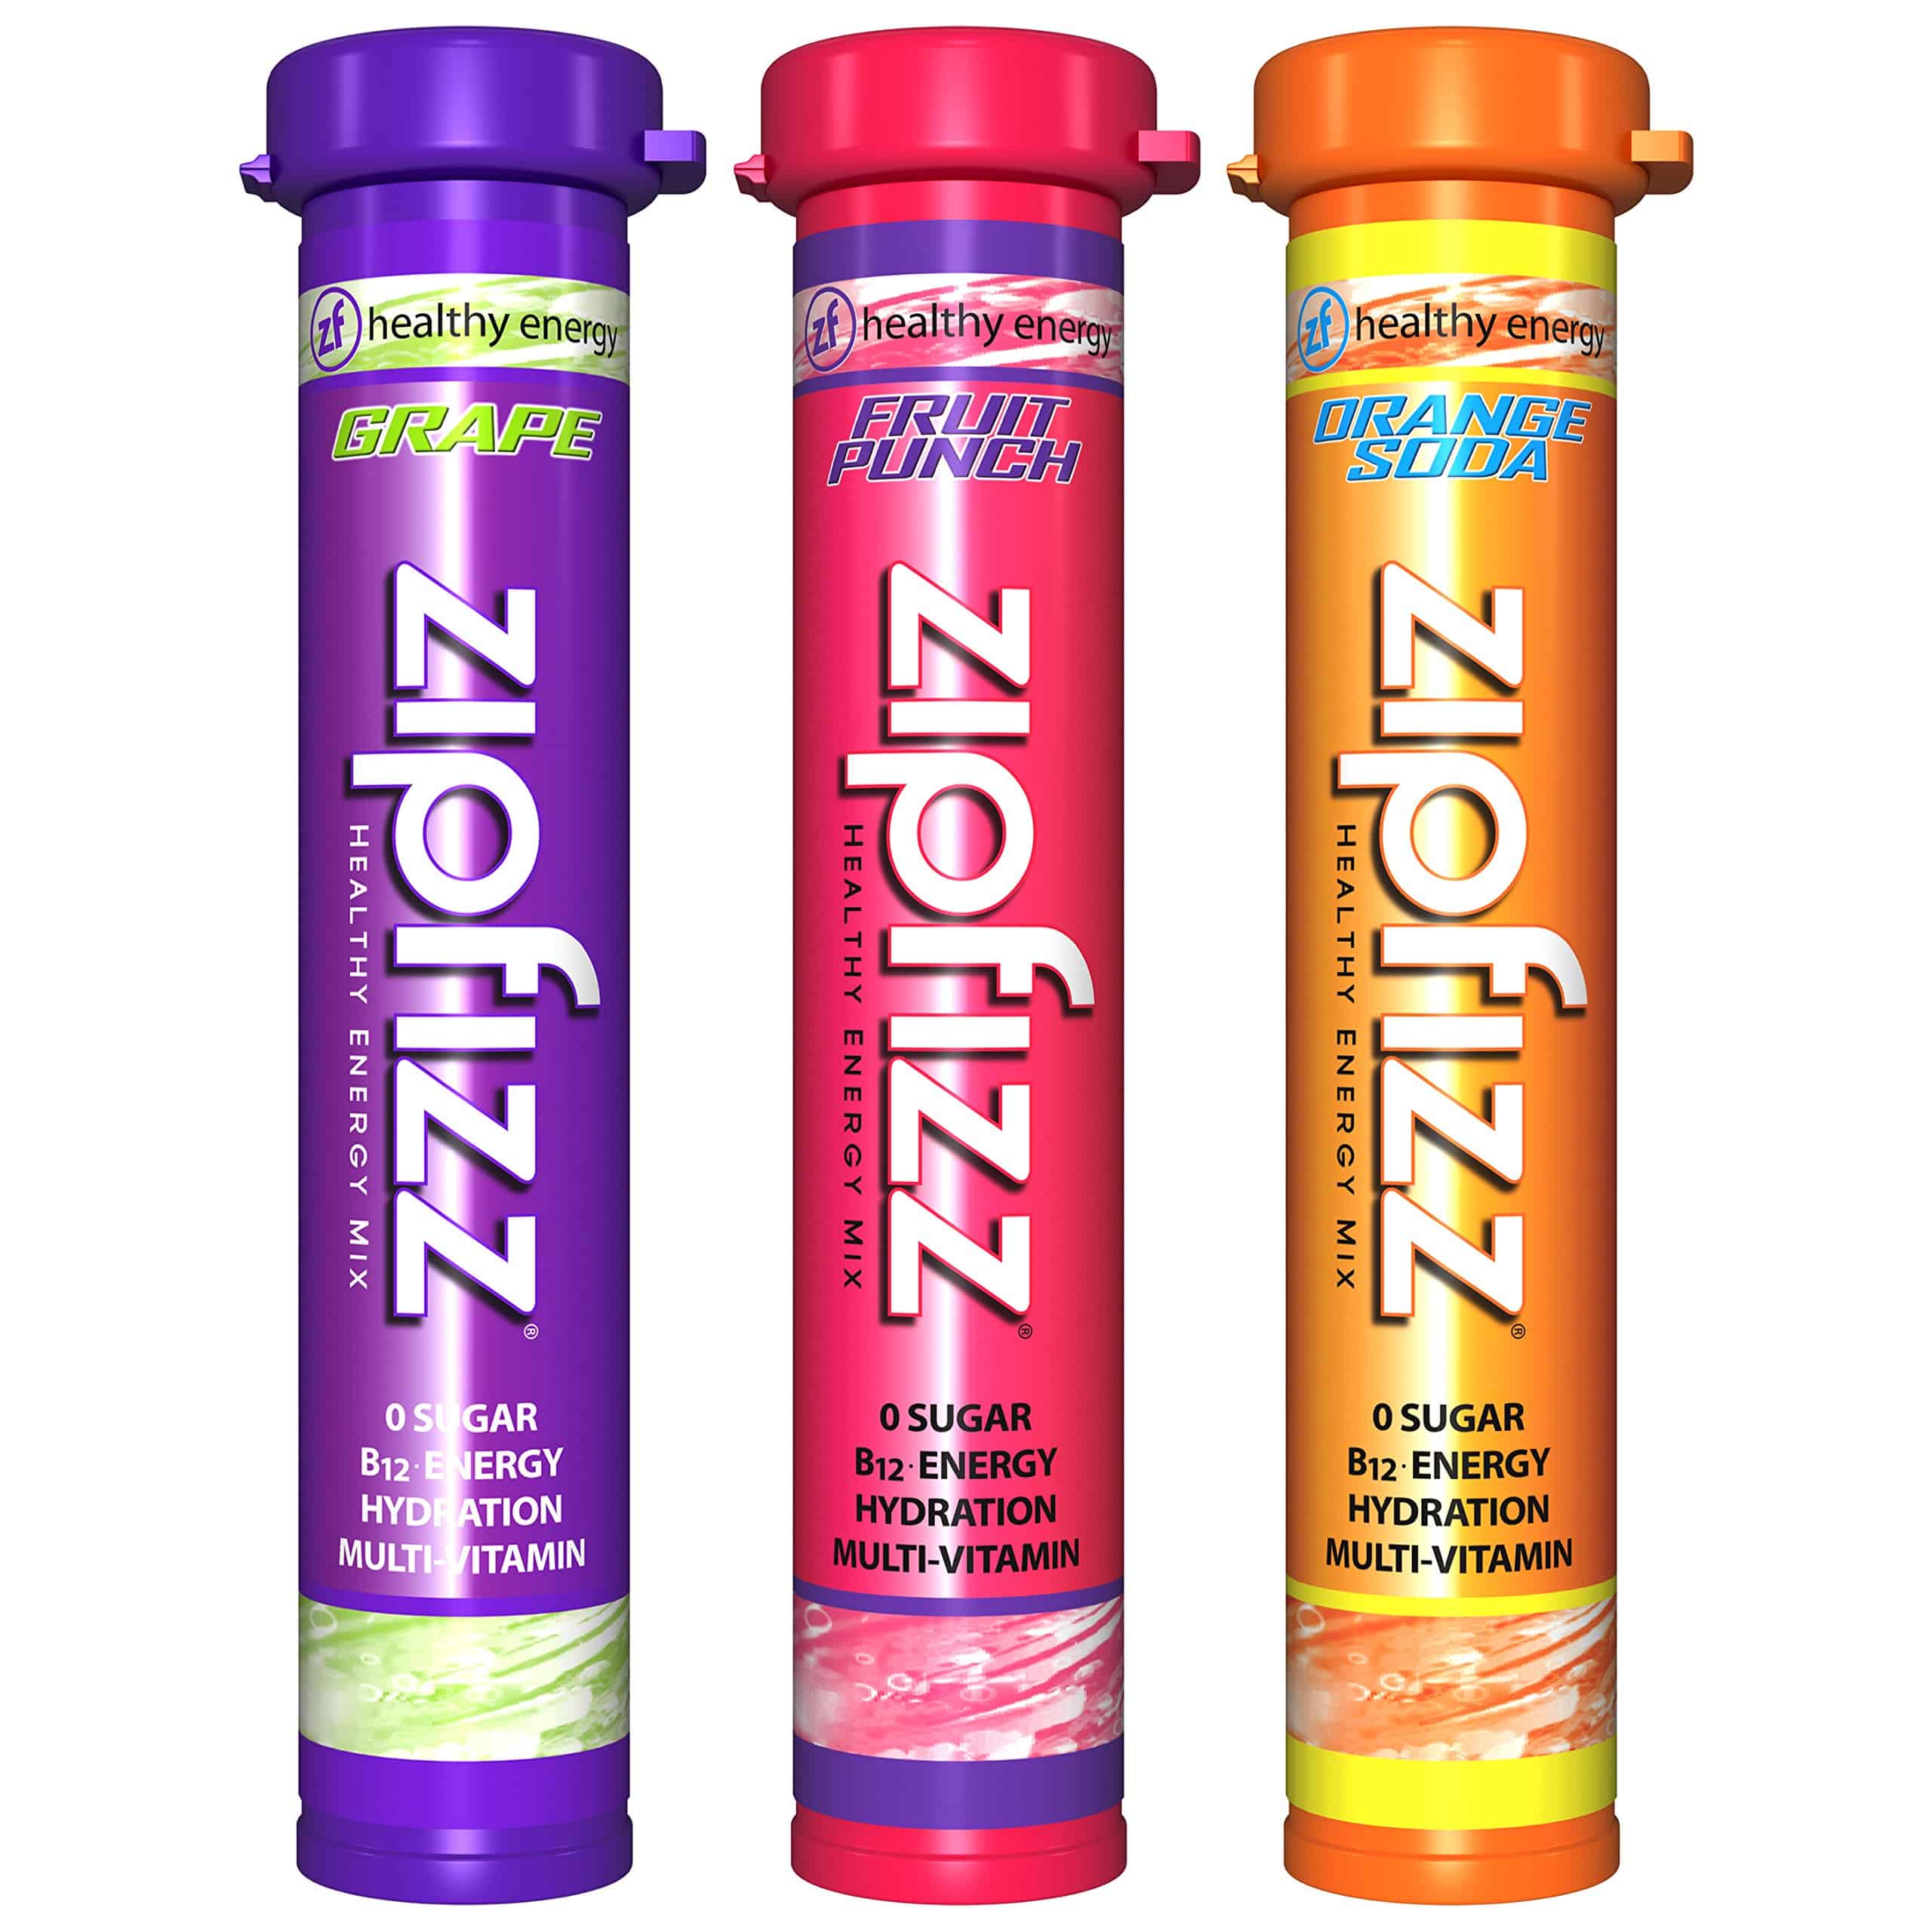 Zipfizz Healthy Energy Drink Mix, Hydration with B12 and Multi Vitamins ...